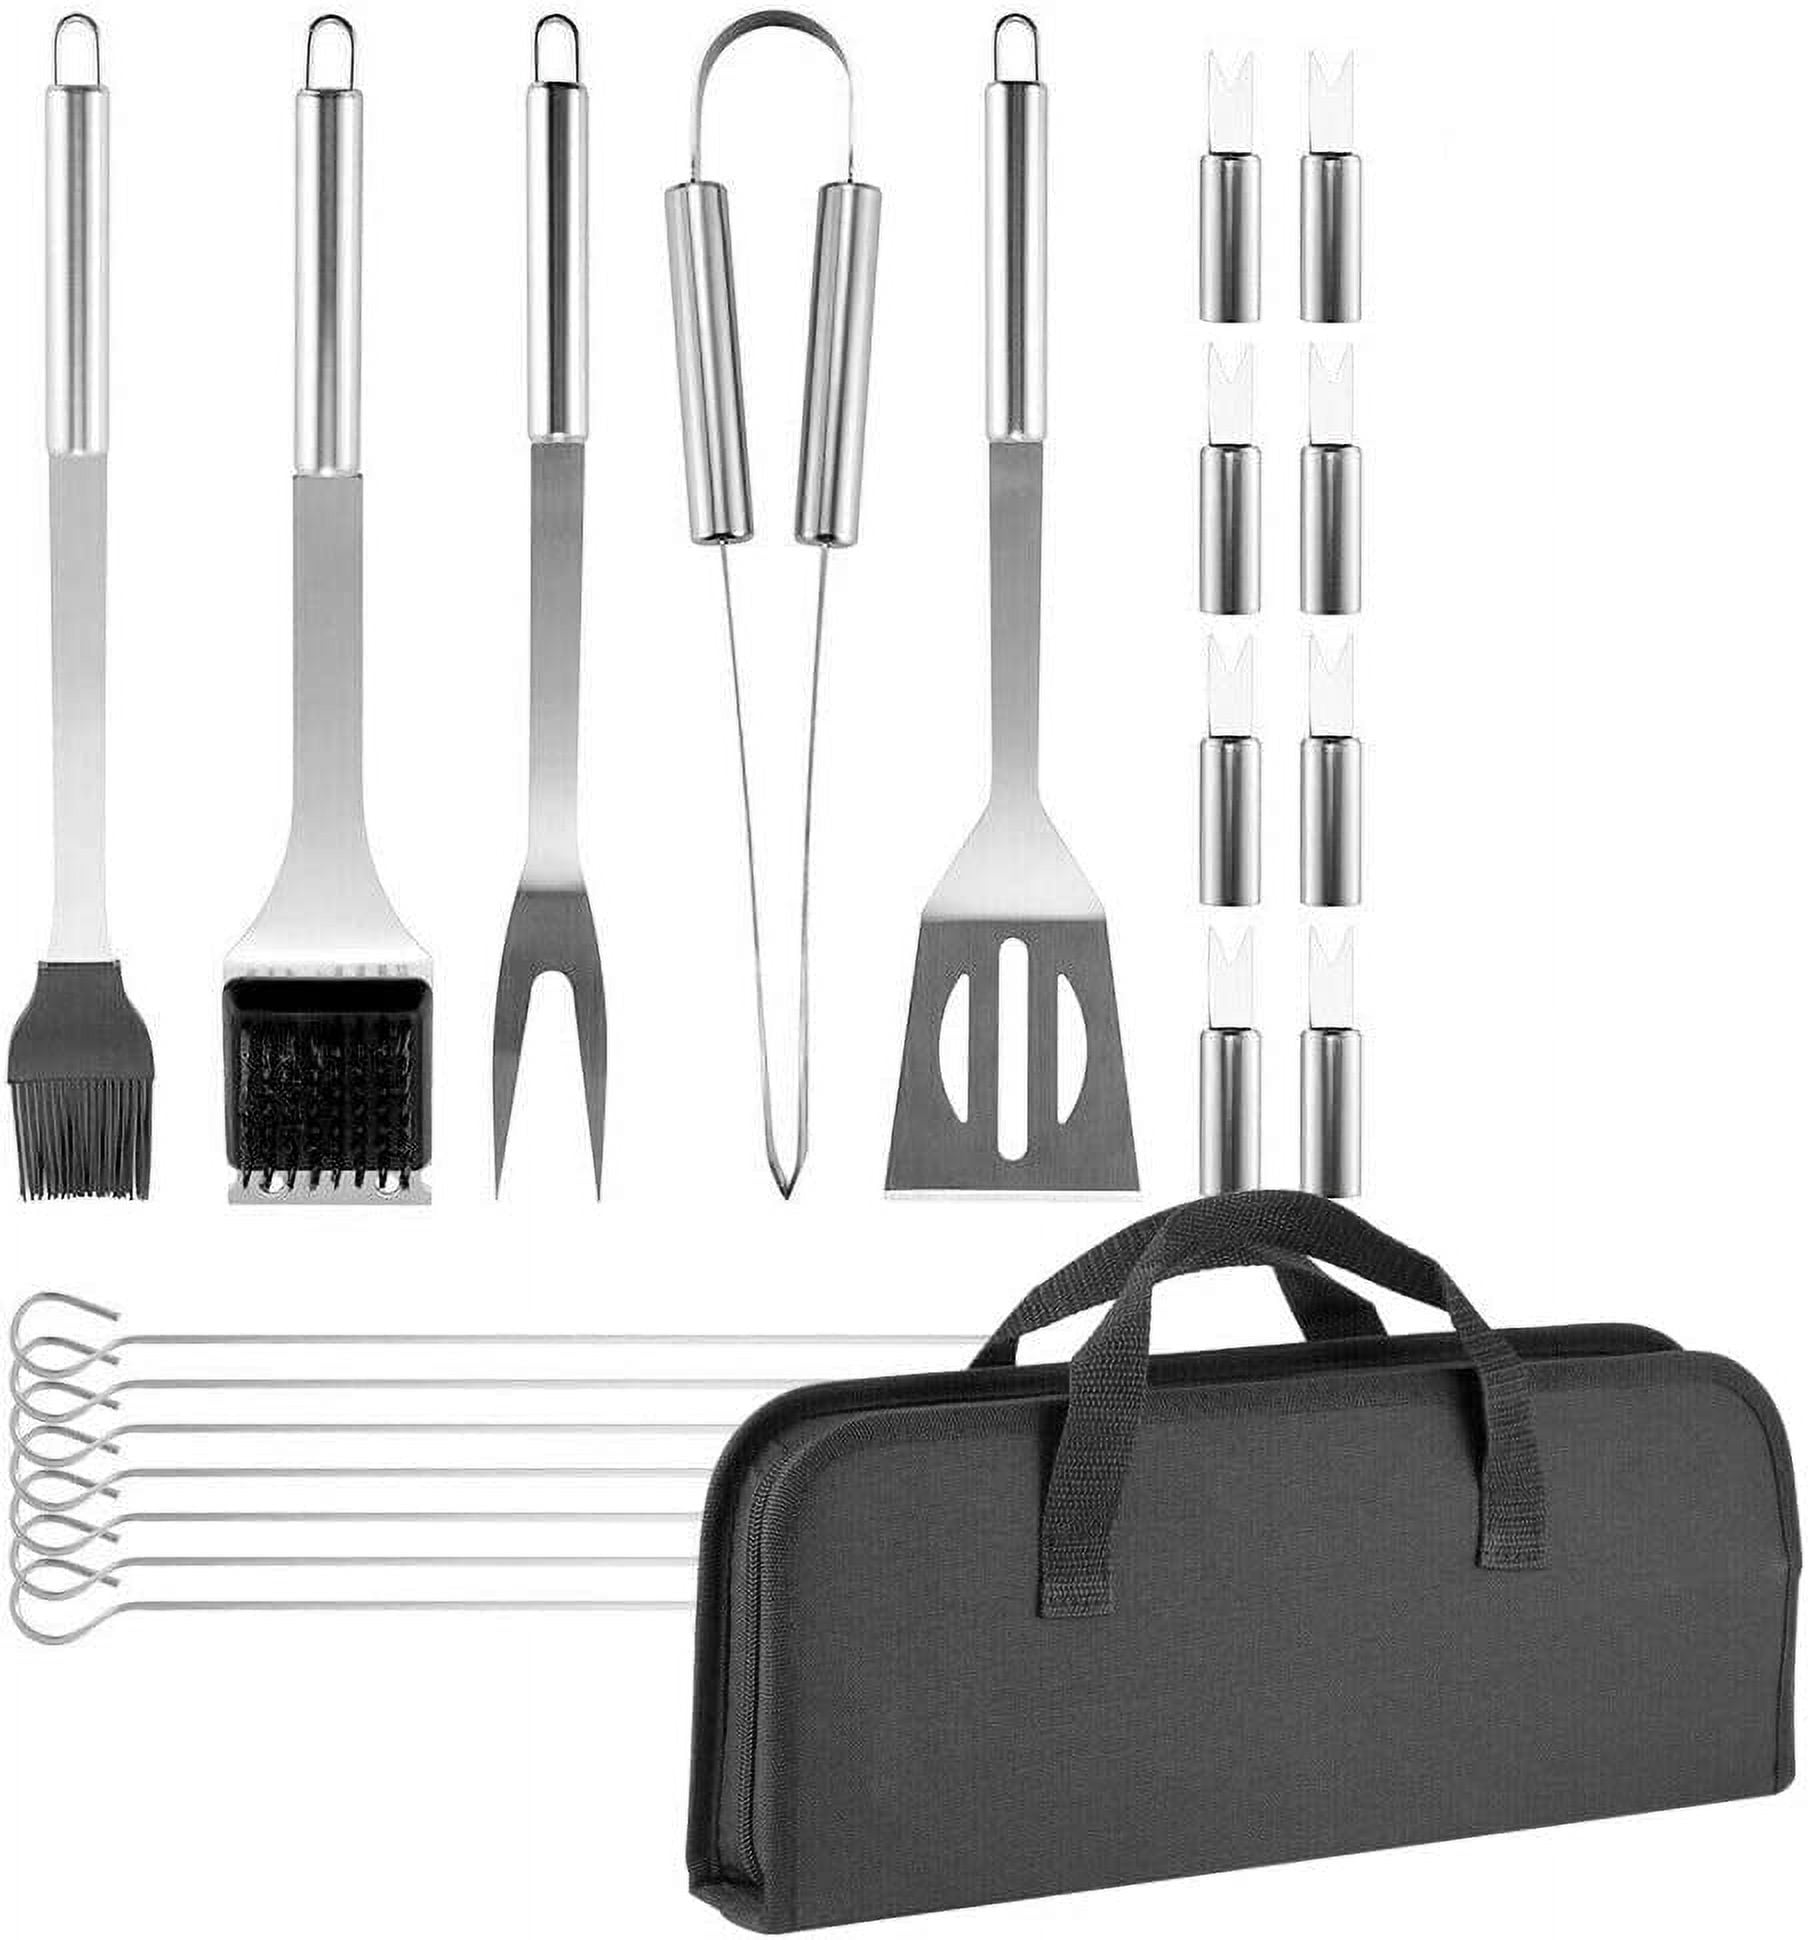 BBQ Grill Tool Set- Stainless Steel Barbecue Grilling Accessories with 7  Utensils and, 1 unit - Ralphs